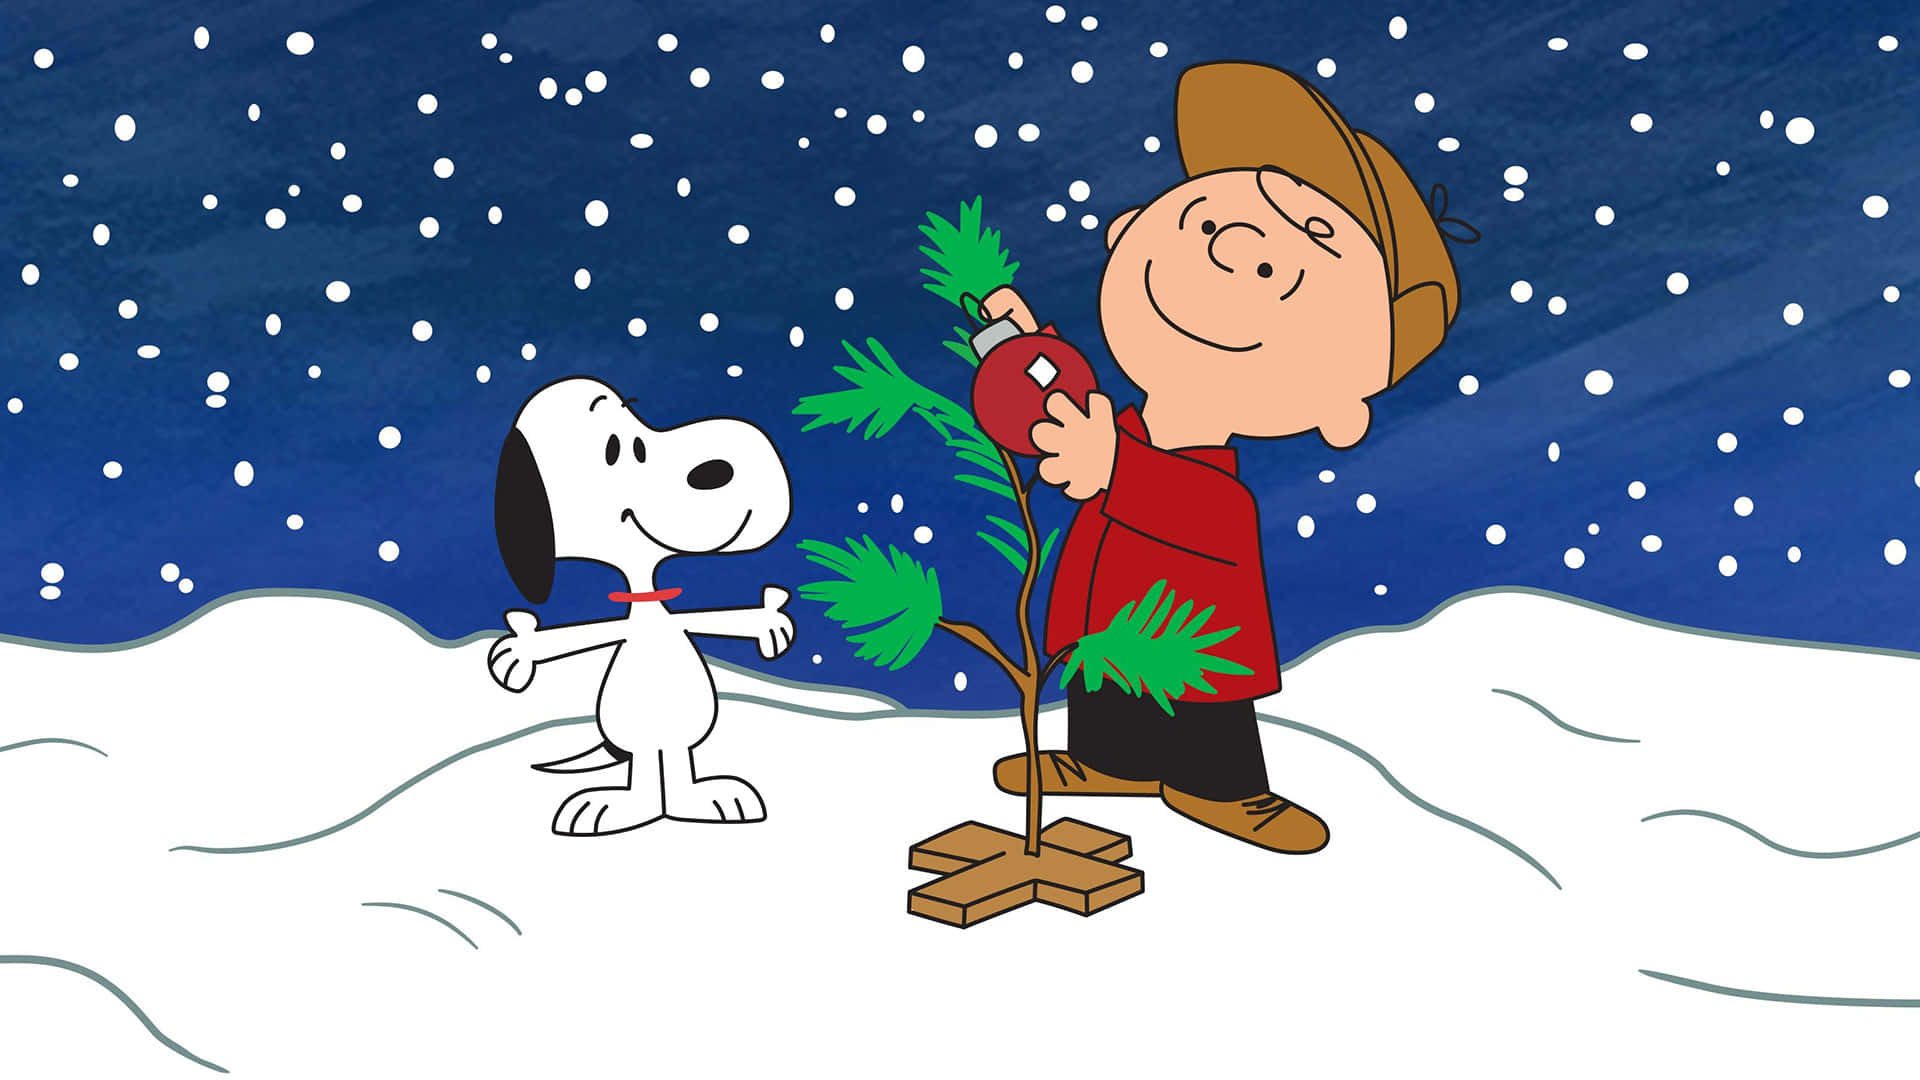 53 CHRISTMAS IPHONE WALLPAPERS TO DOWNLOAD WITHOUT COST  Godfather  Style  Wallpaper iphone christmas Christmas phone wallpaper Charlie  brown christmas